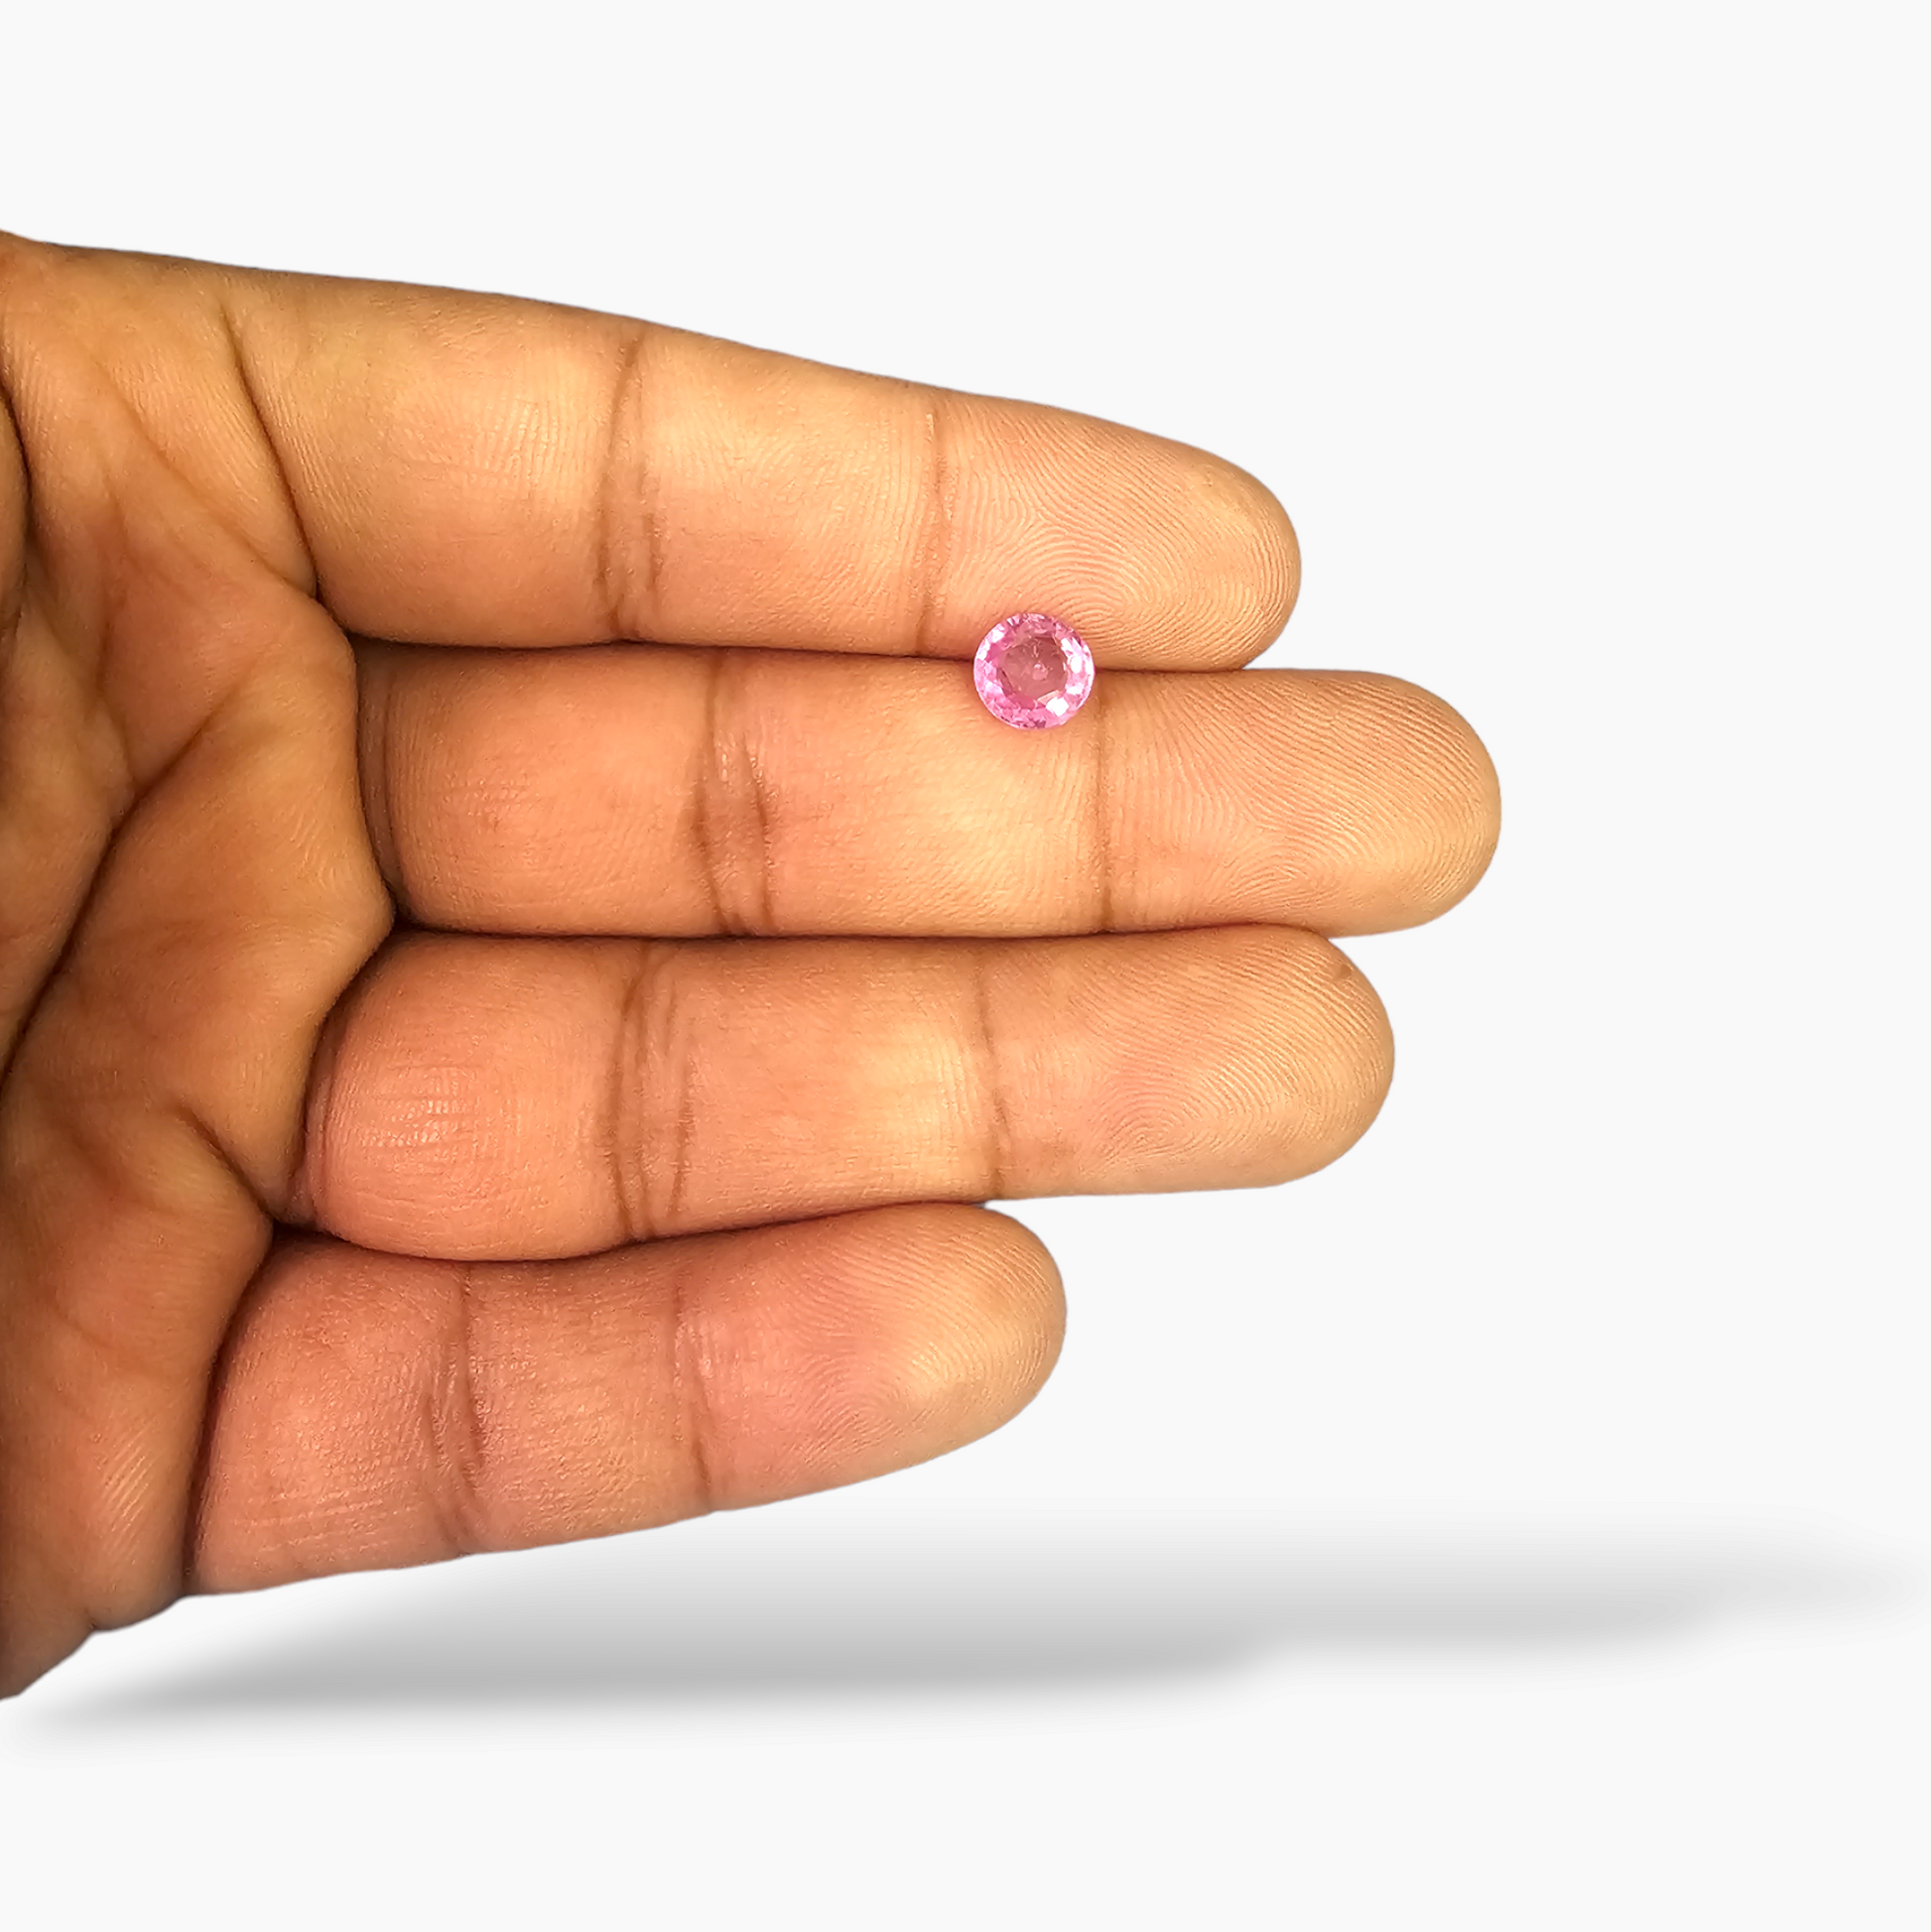 Pink Sapphire Natural Stone Round Cut 1.4 Carats